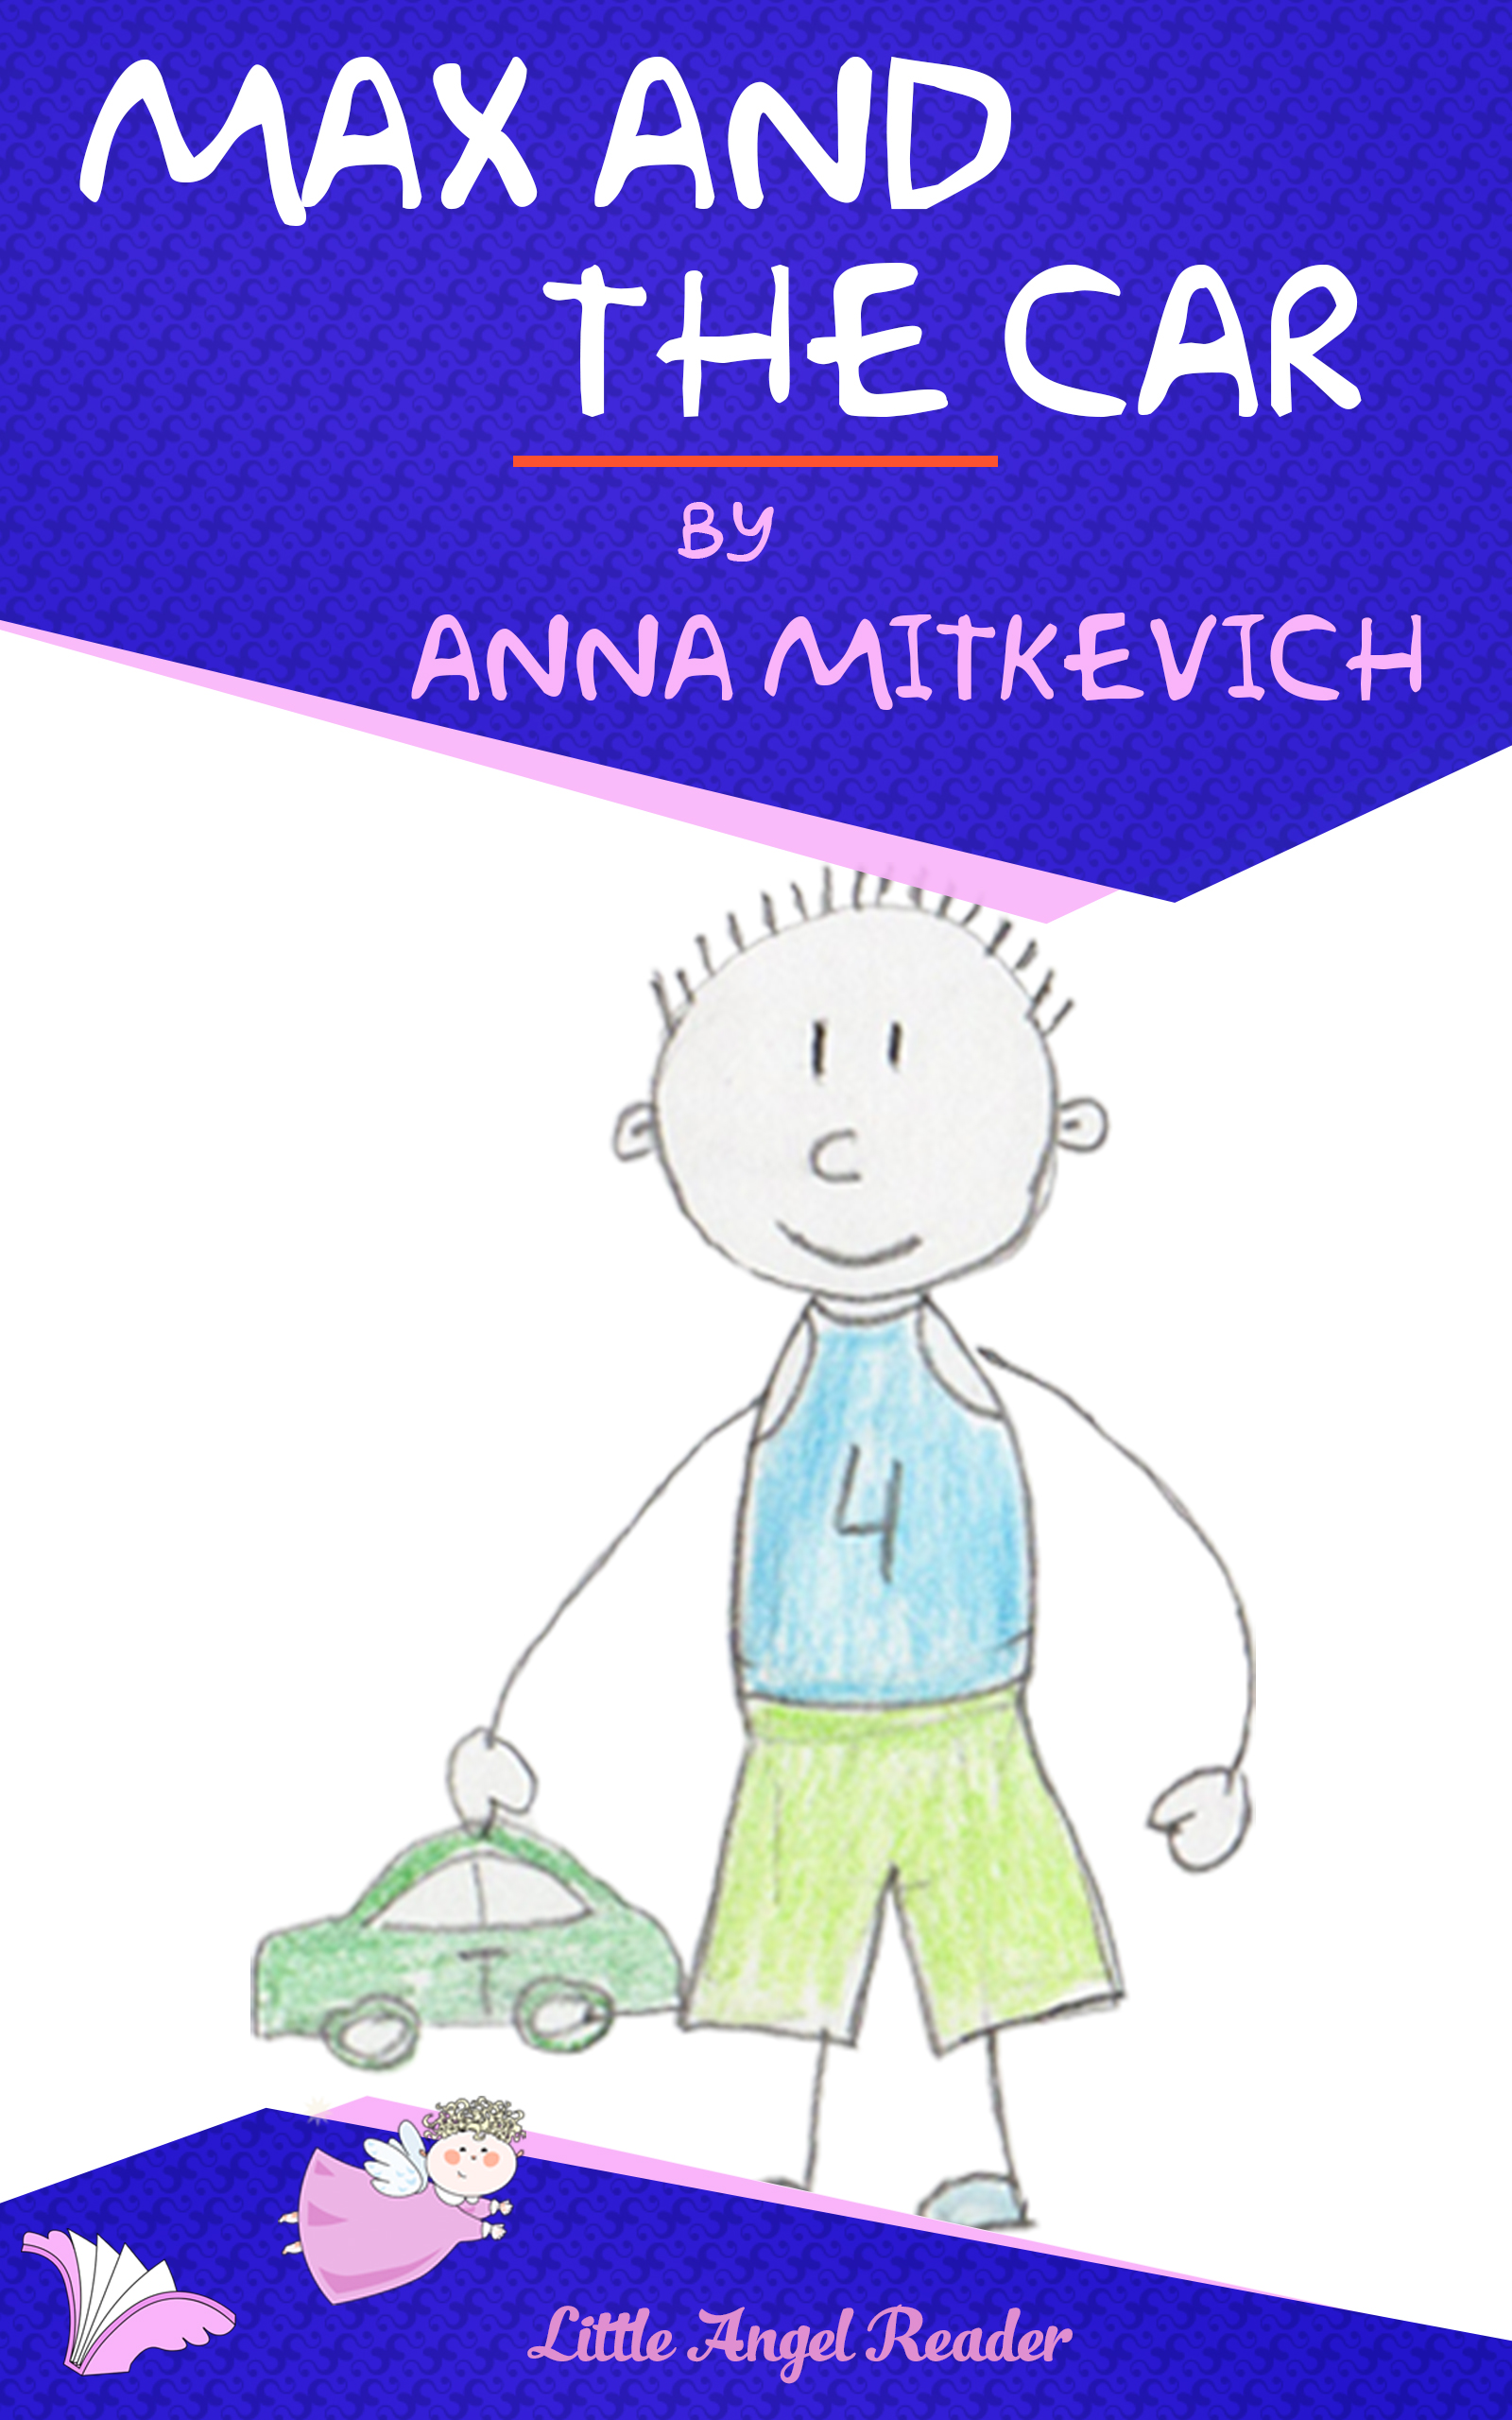 FREE: Max and the Car by Anna Mitkevich